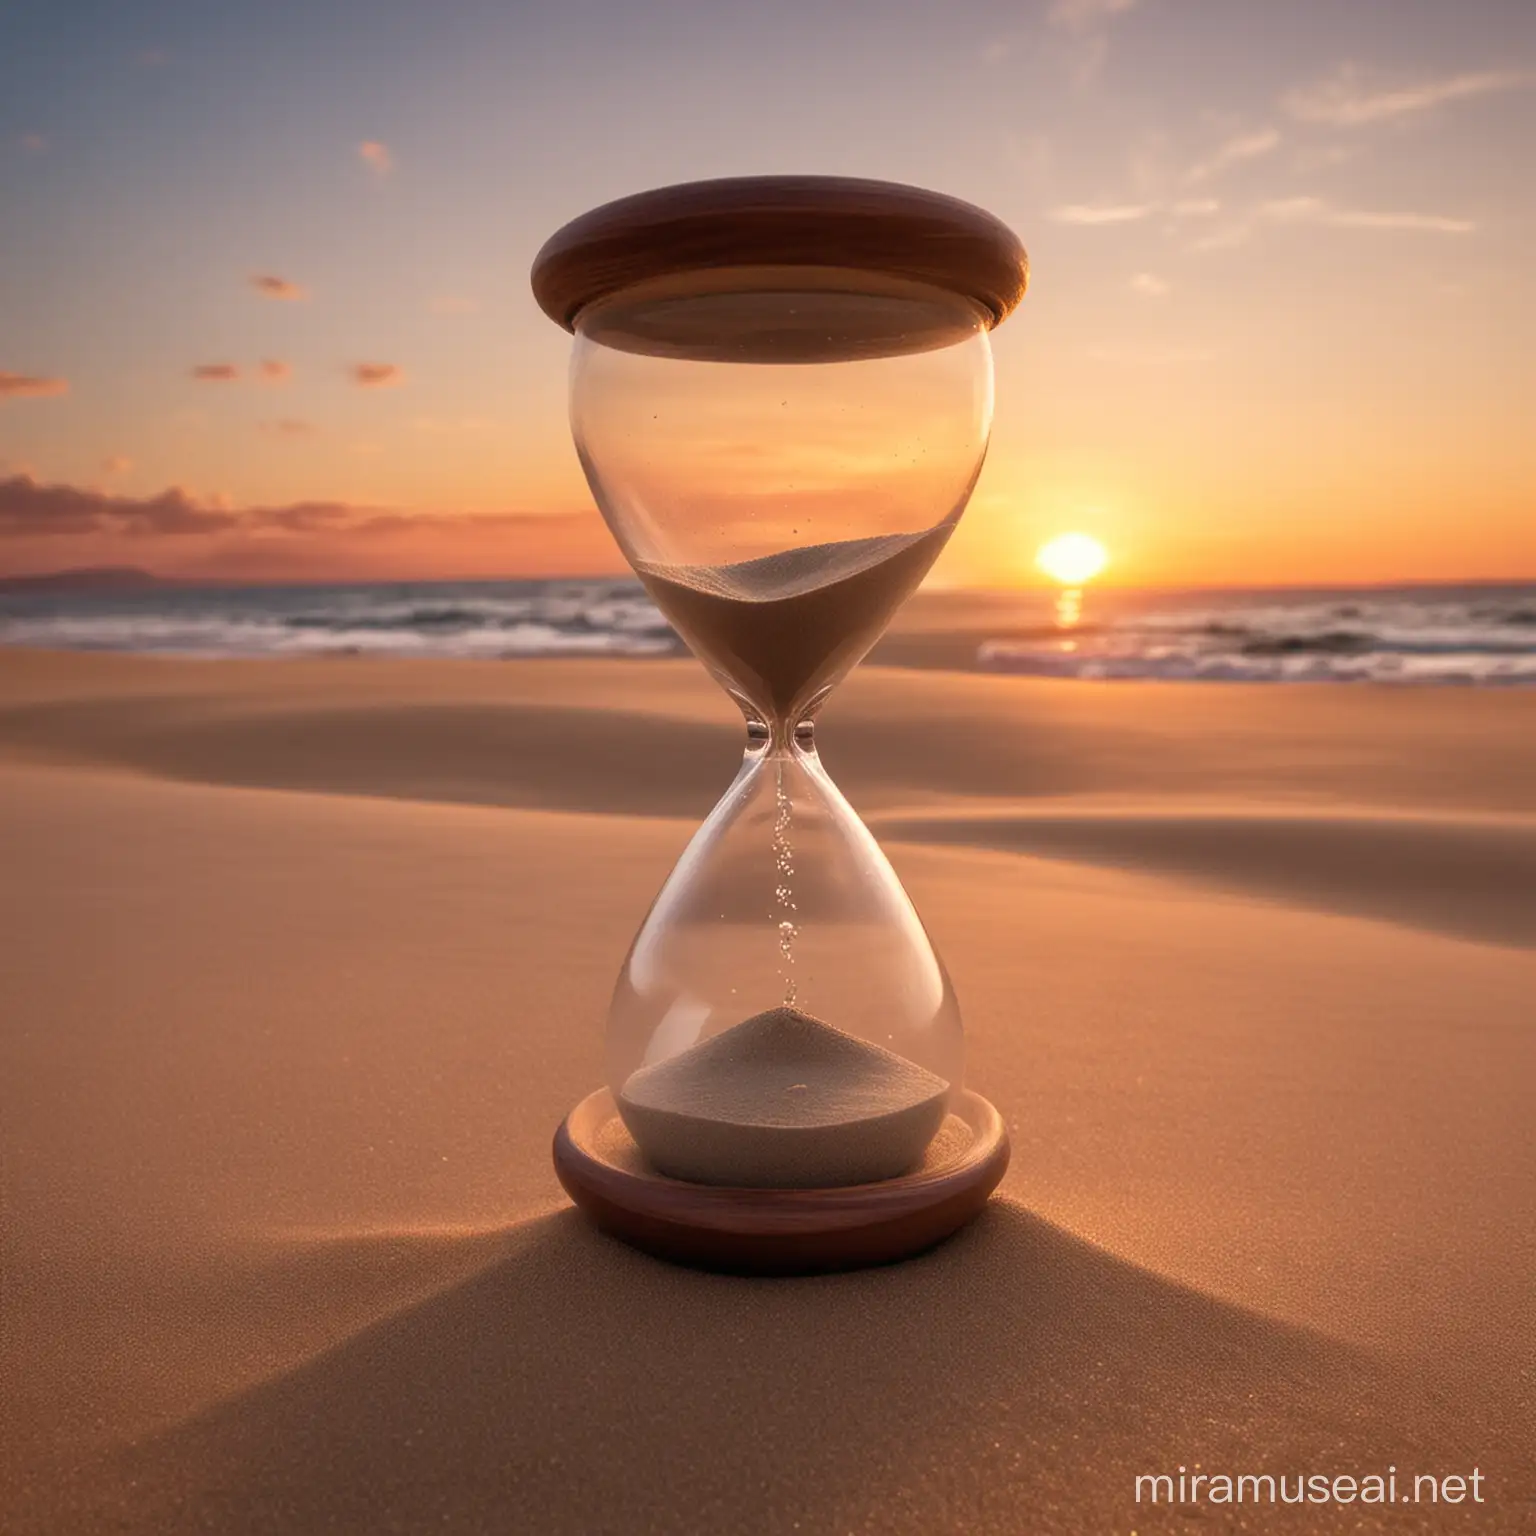 Silhouette of Hourglass at Sunset on Beach